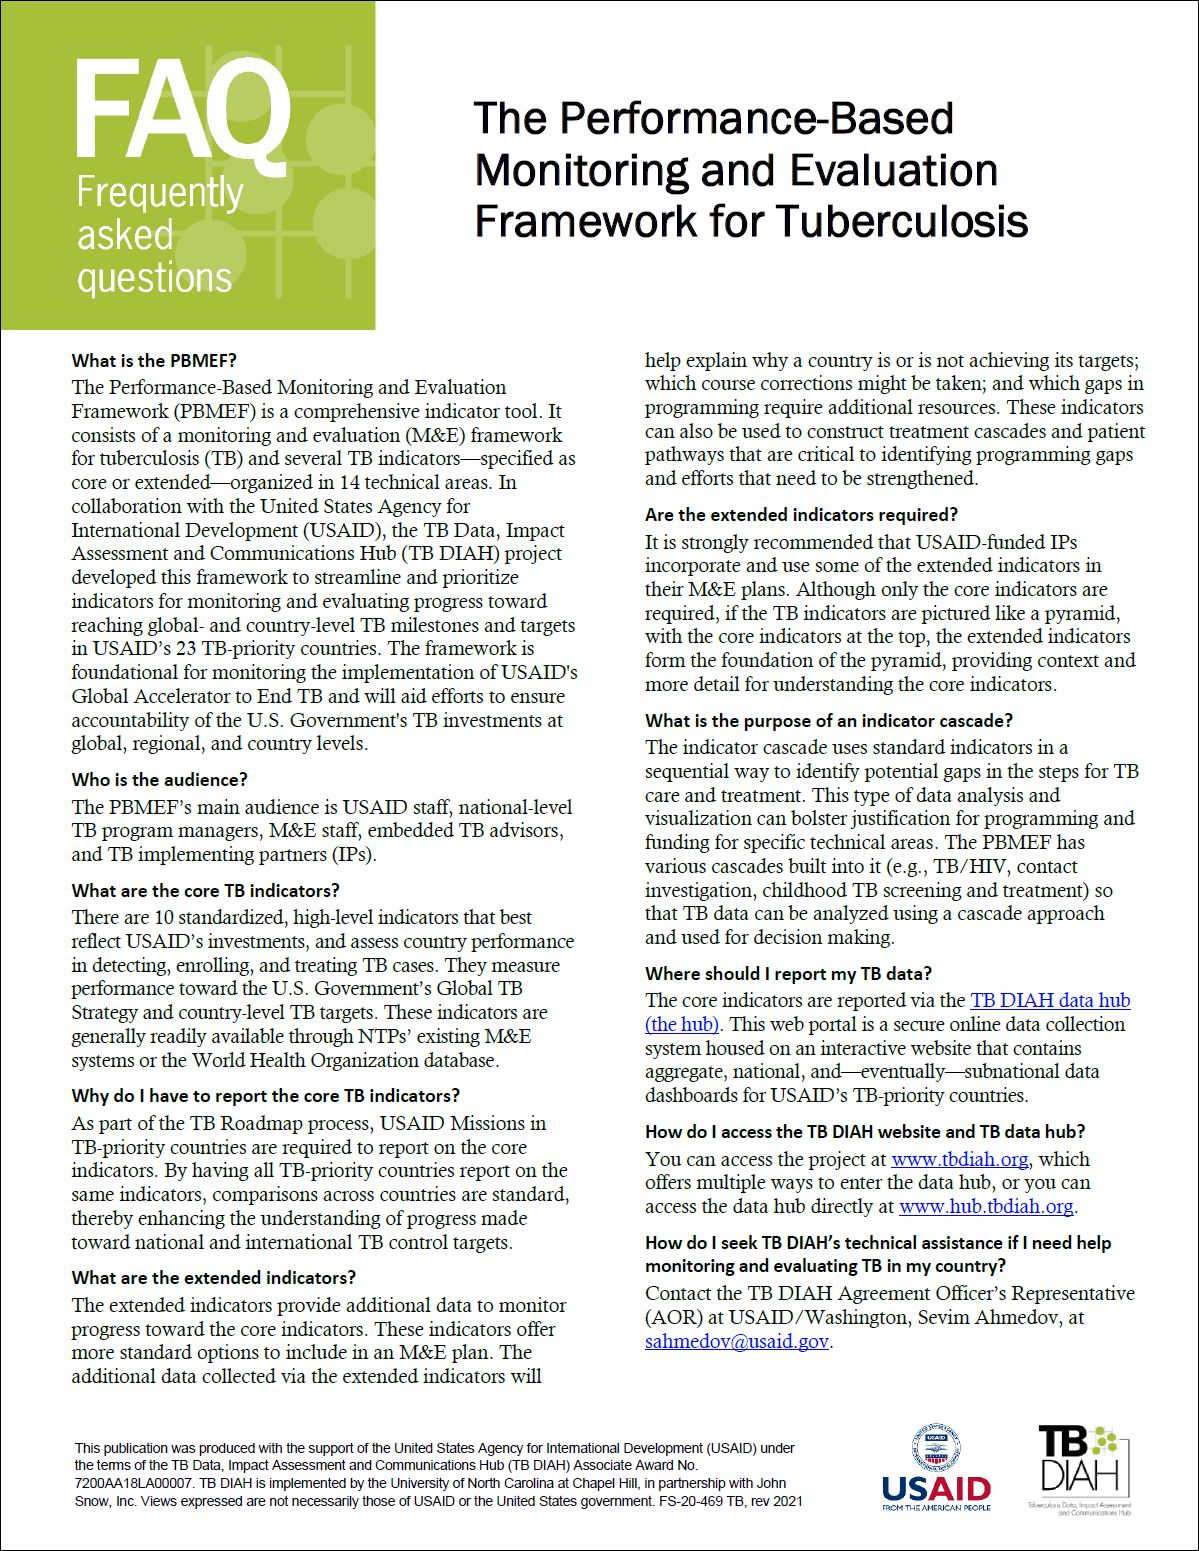 Frequently Asked Questions: The Performance-Based Monitoring and Evaluation Framework for Tuberculosis